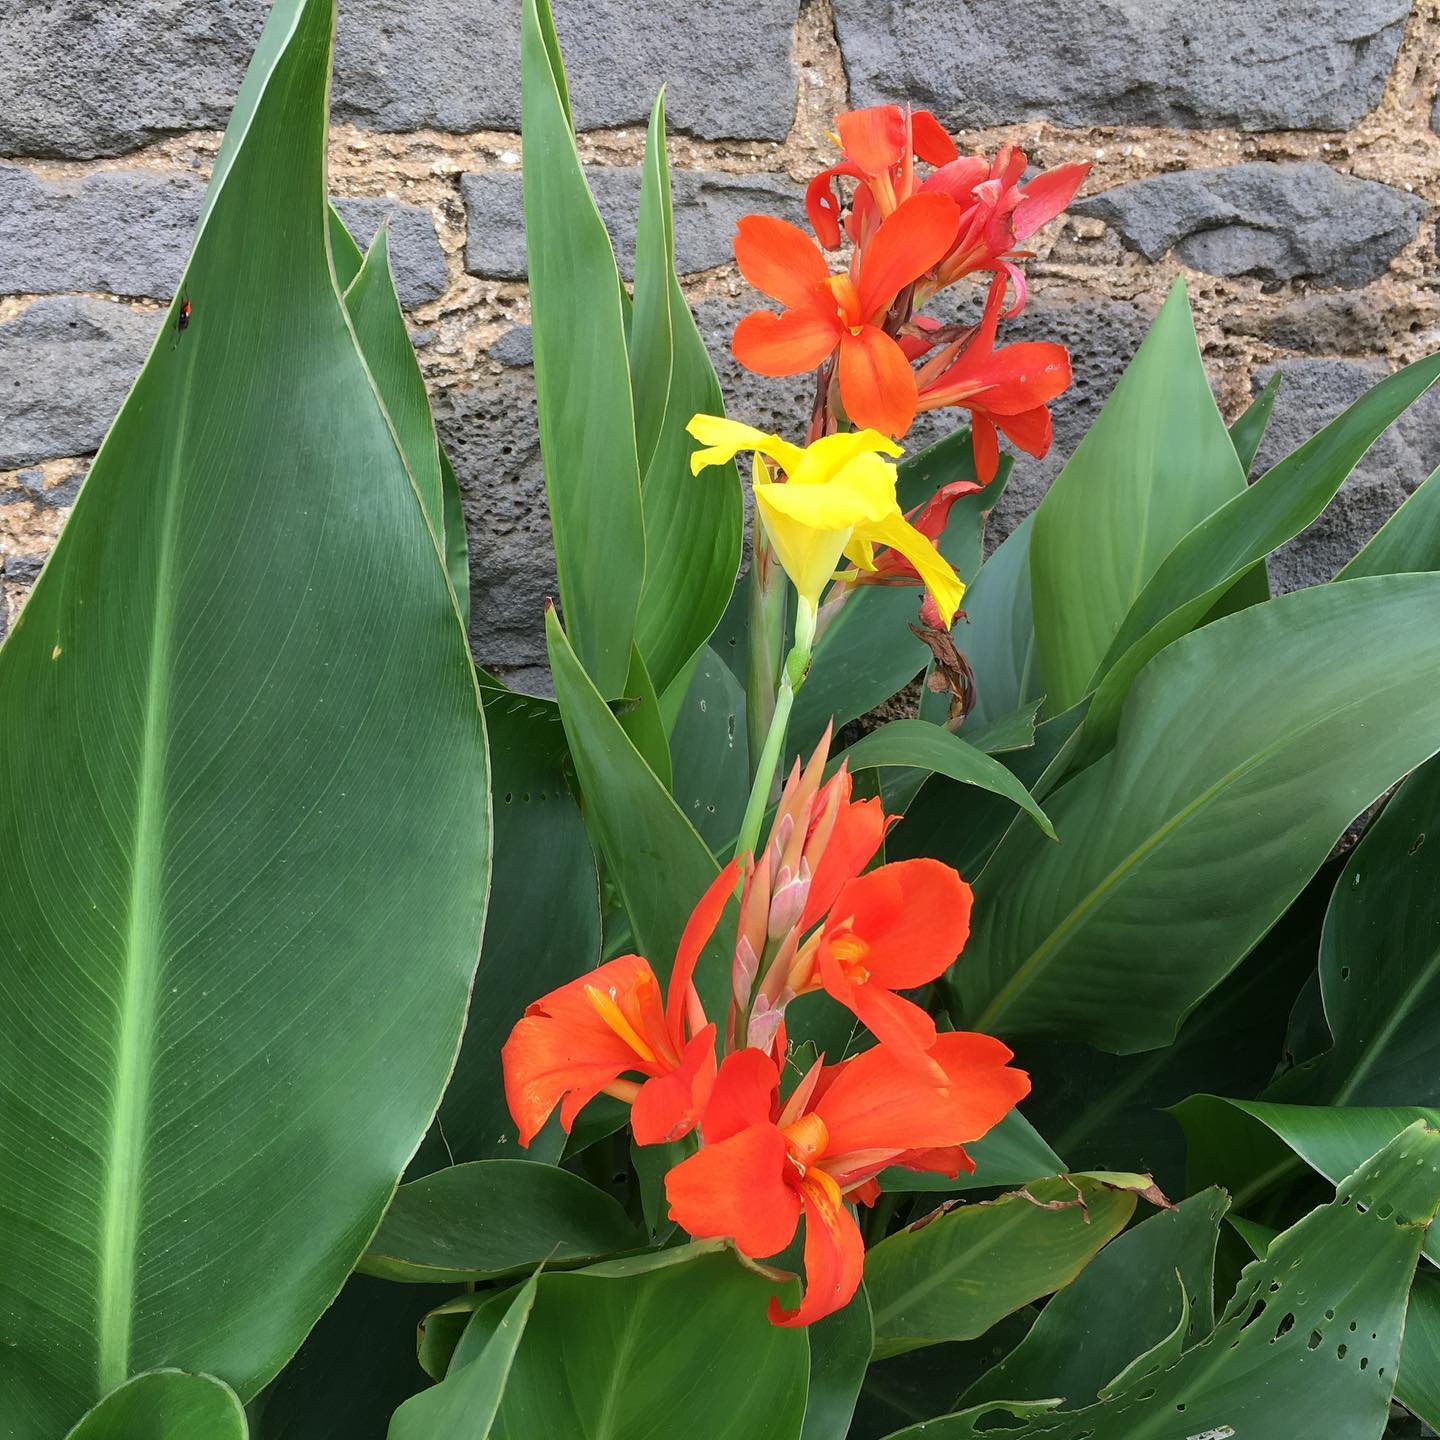 How To Grow And Care For Canna